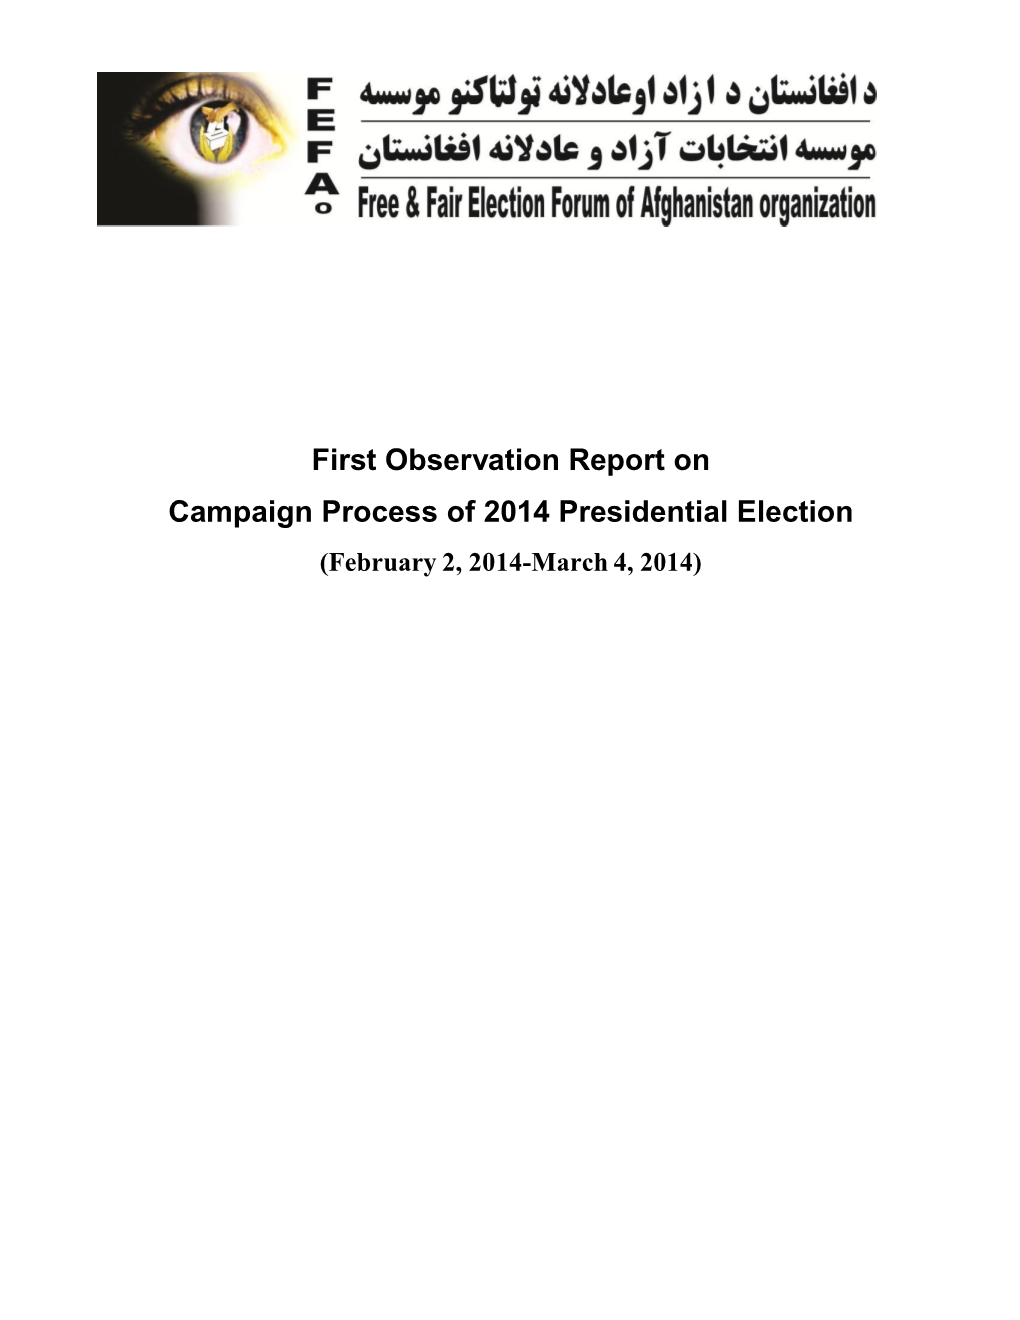 First Observation Report on Campaign Process of 2014 Presidential